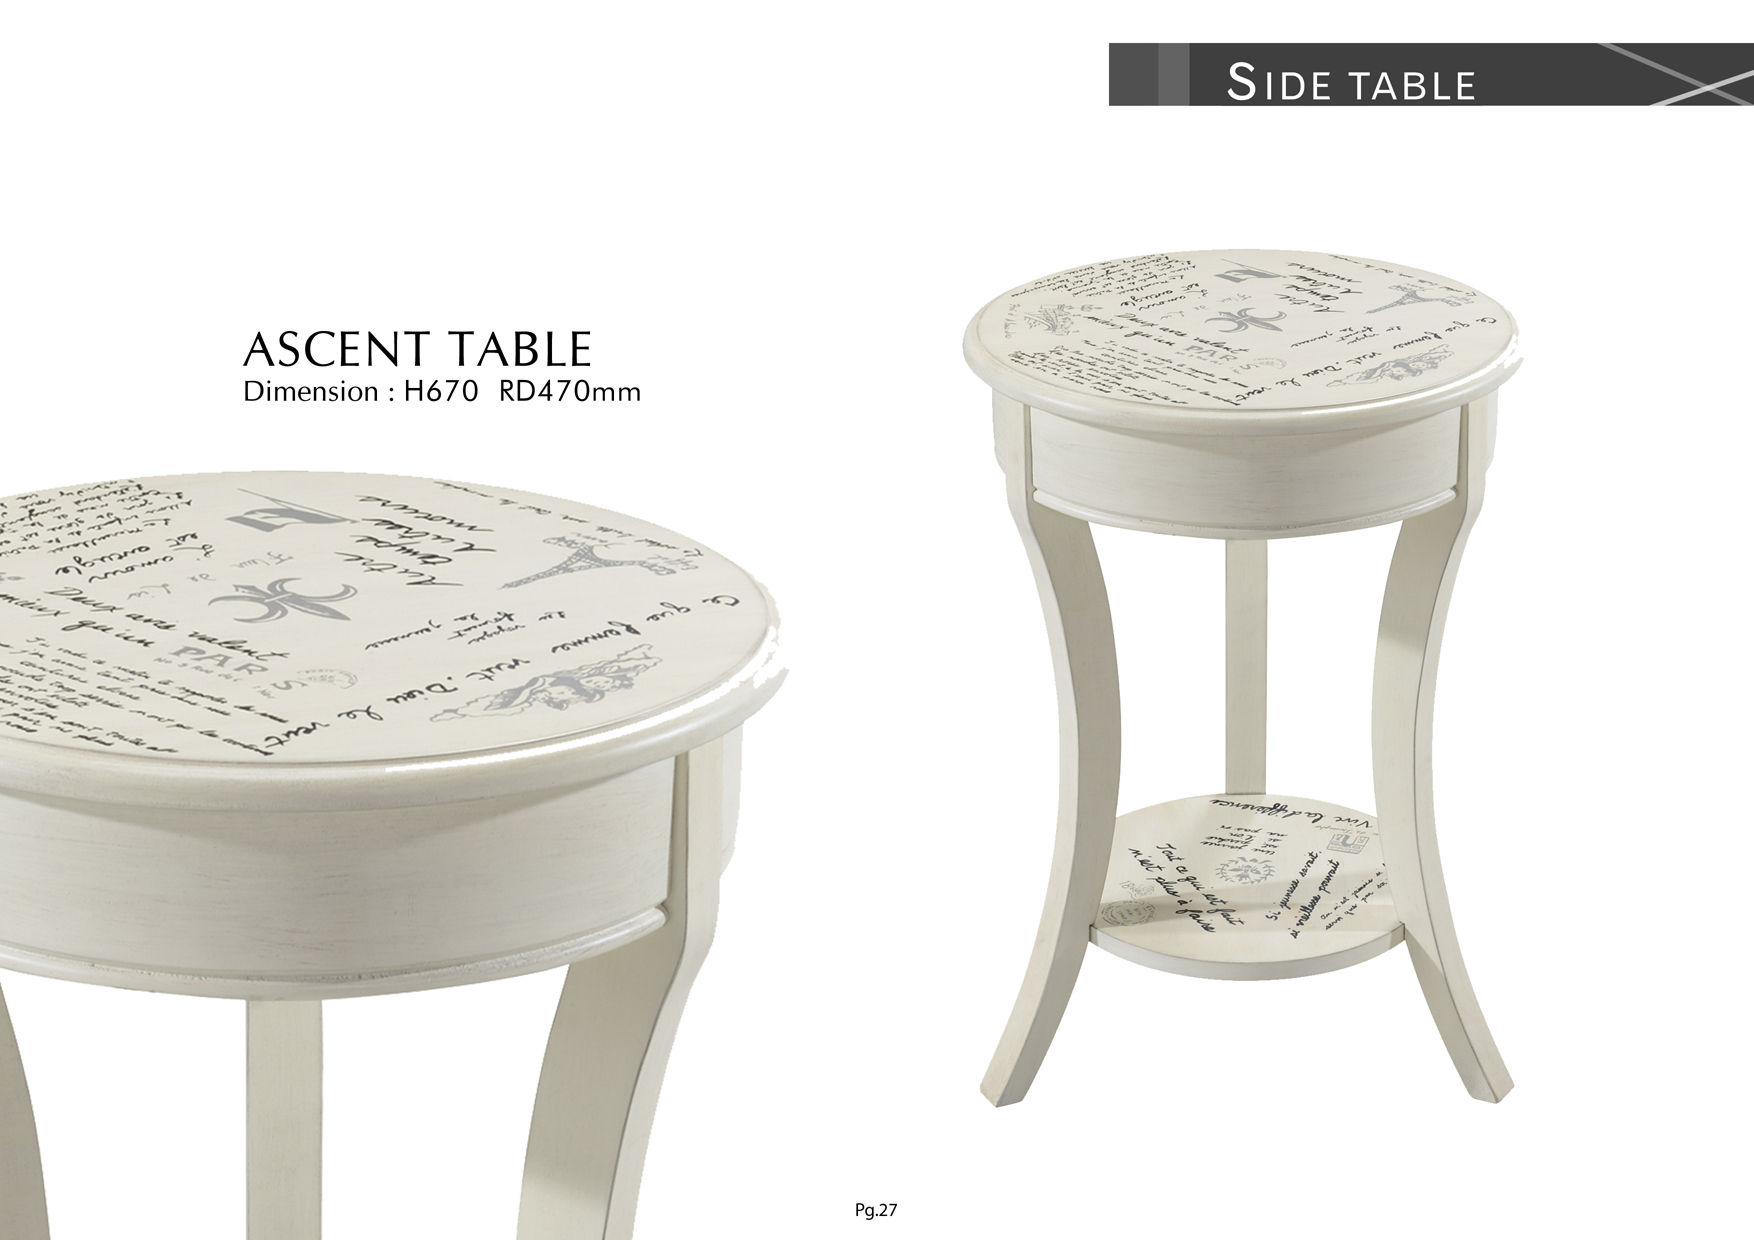 Product: PG27. ASCENT TABLE